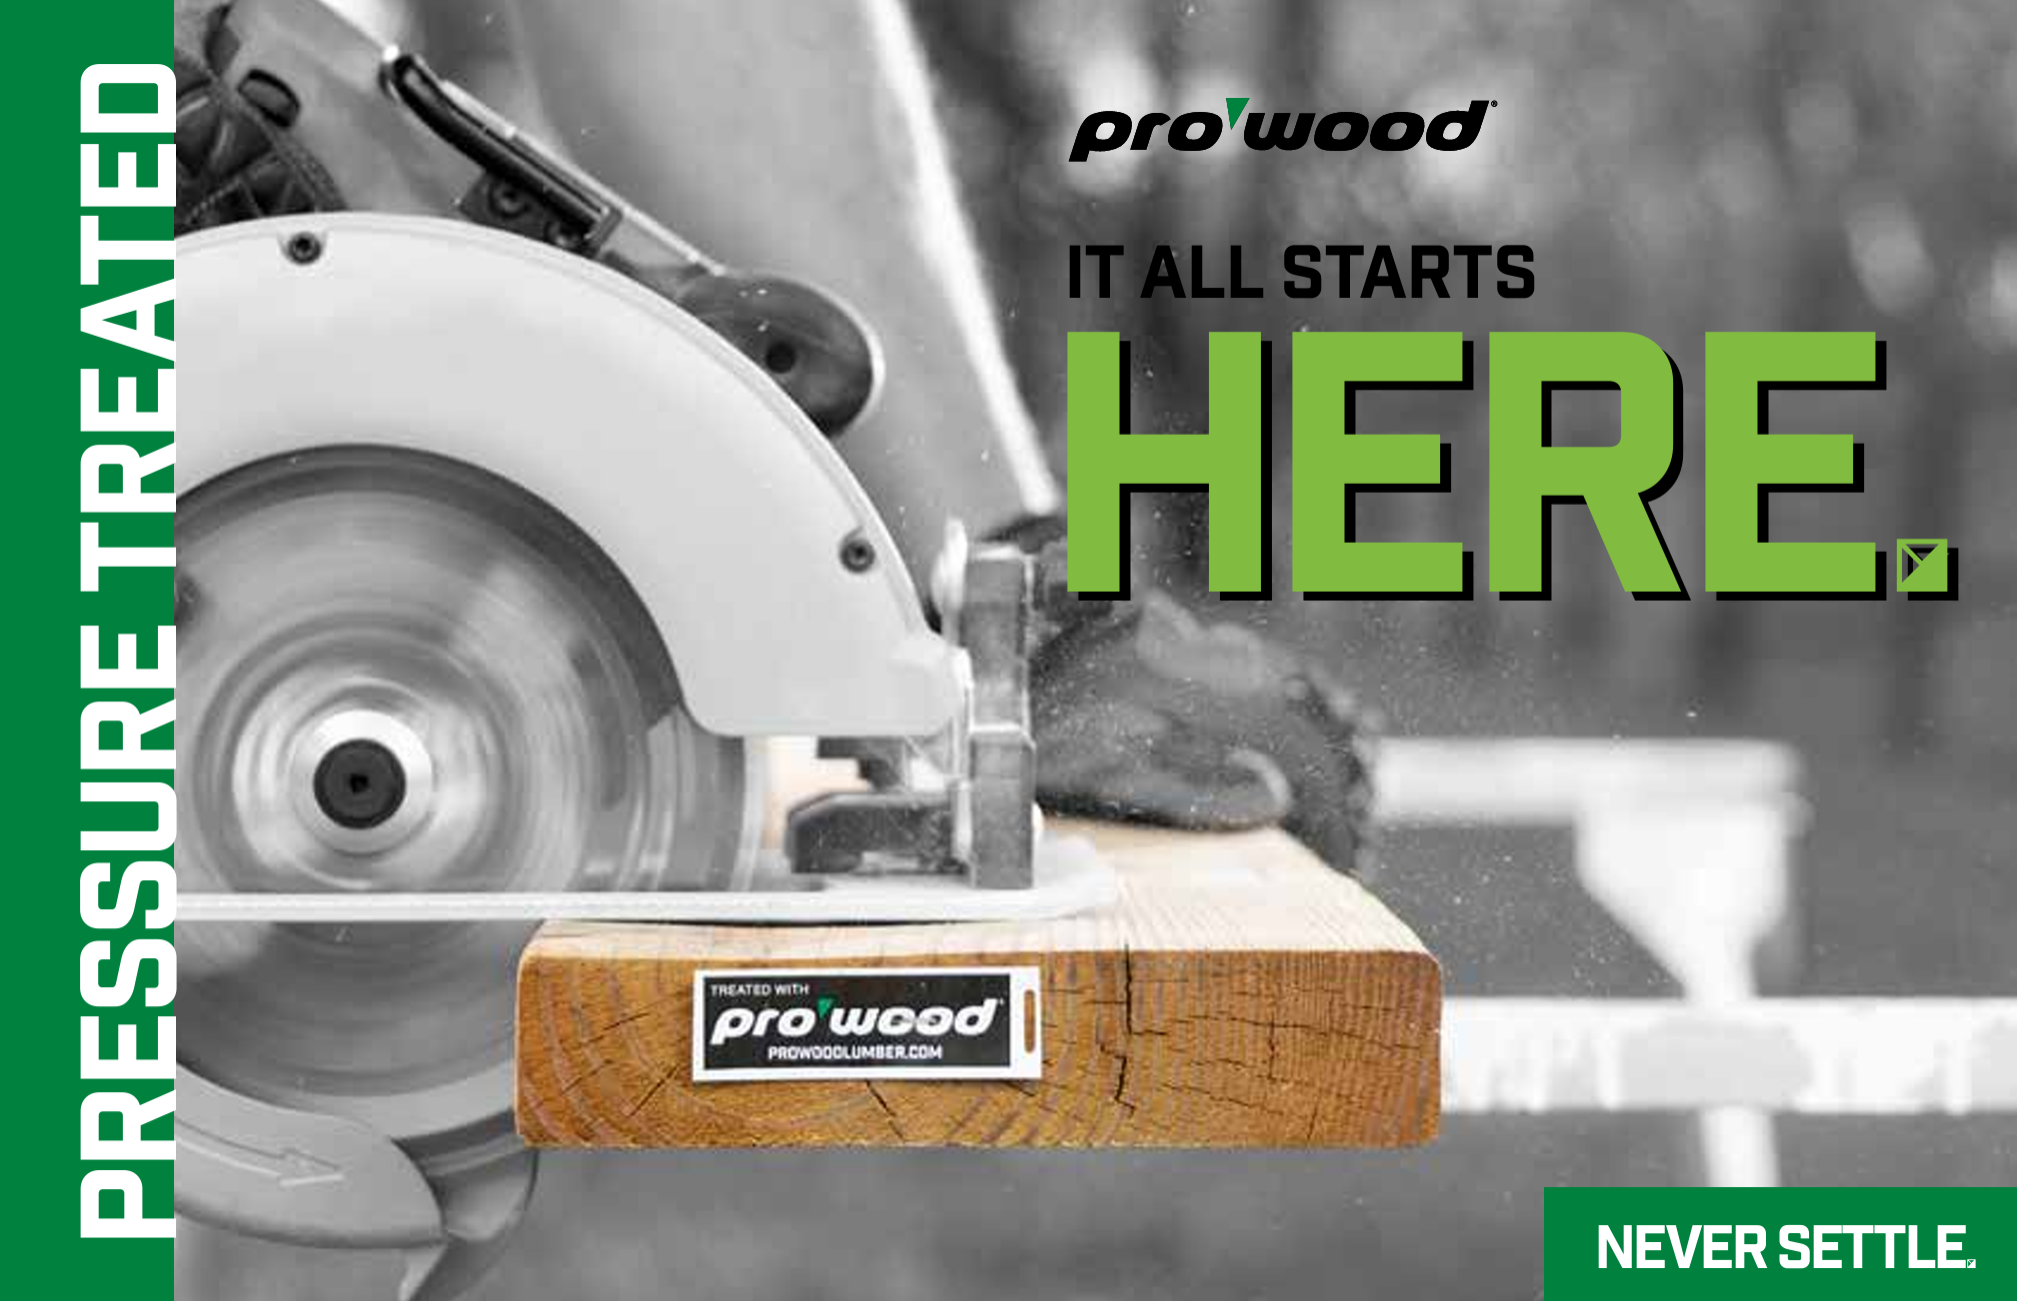 A circular saw cutting into pressure-treated lumber with ProWood logo and slogan.